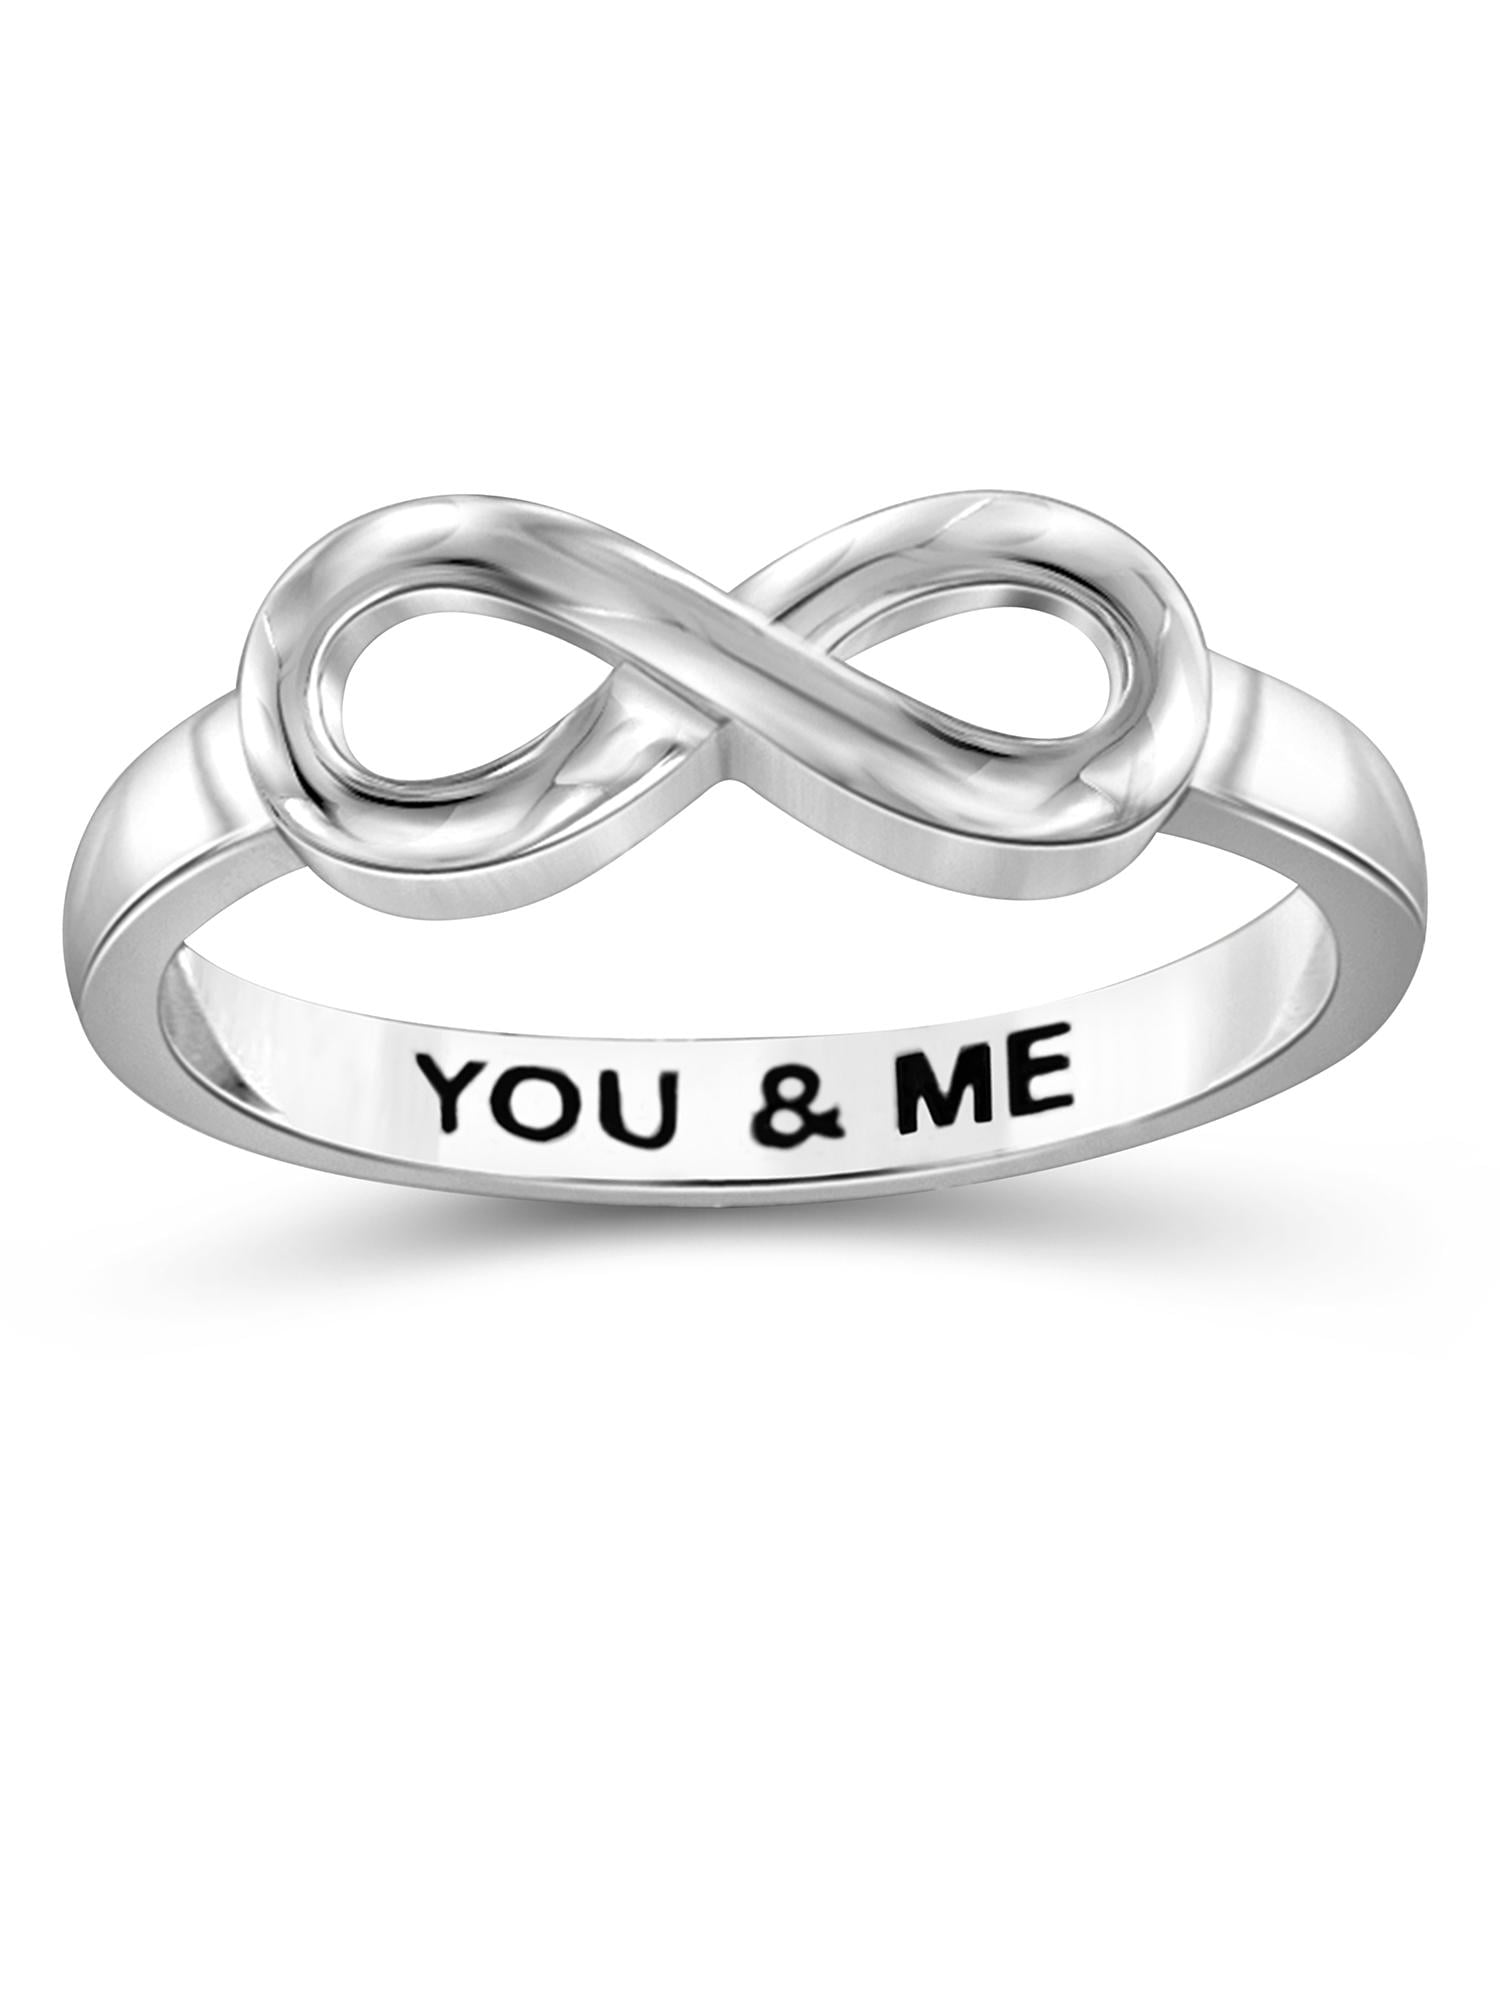 USA Seller Tiny Infinity Ring Sterling Silver 925 Plain Best Deal Jewelry Size 5 